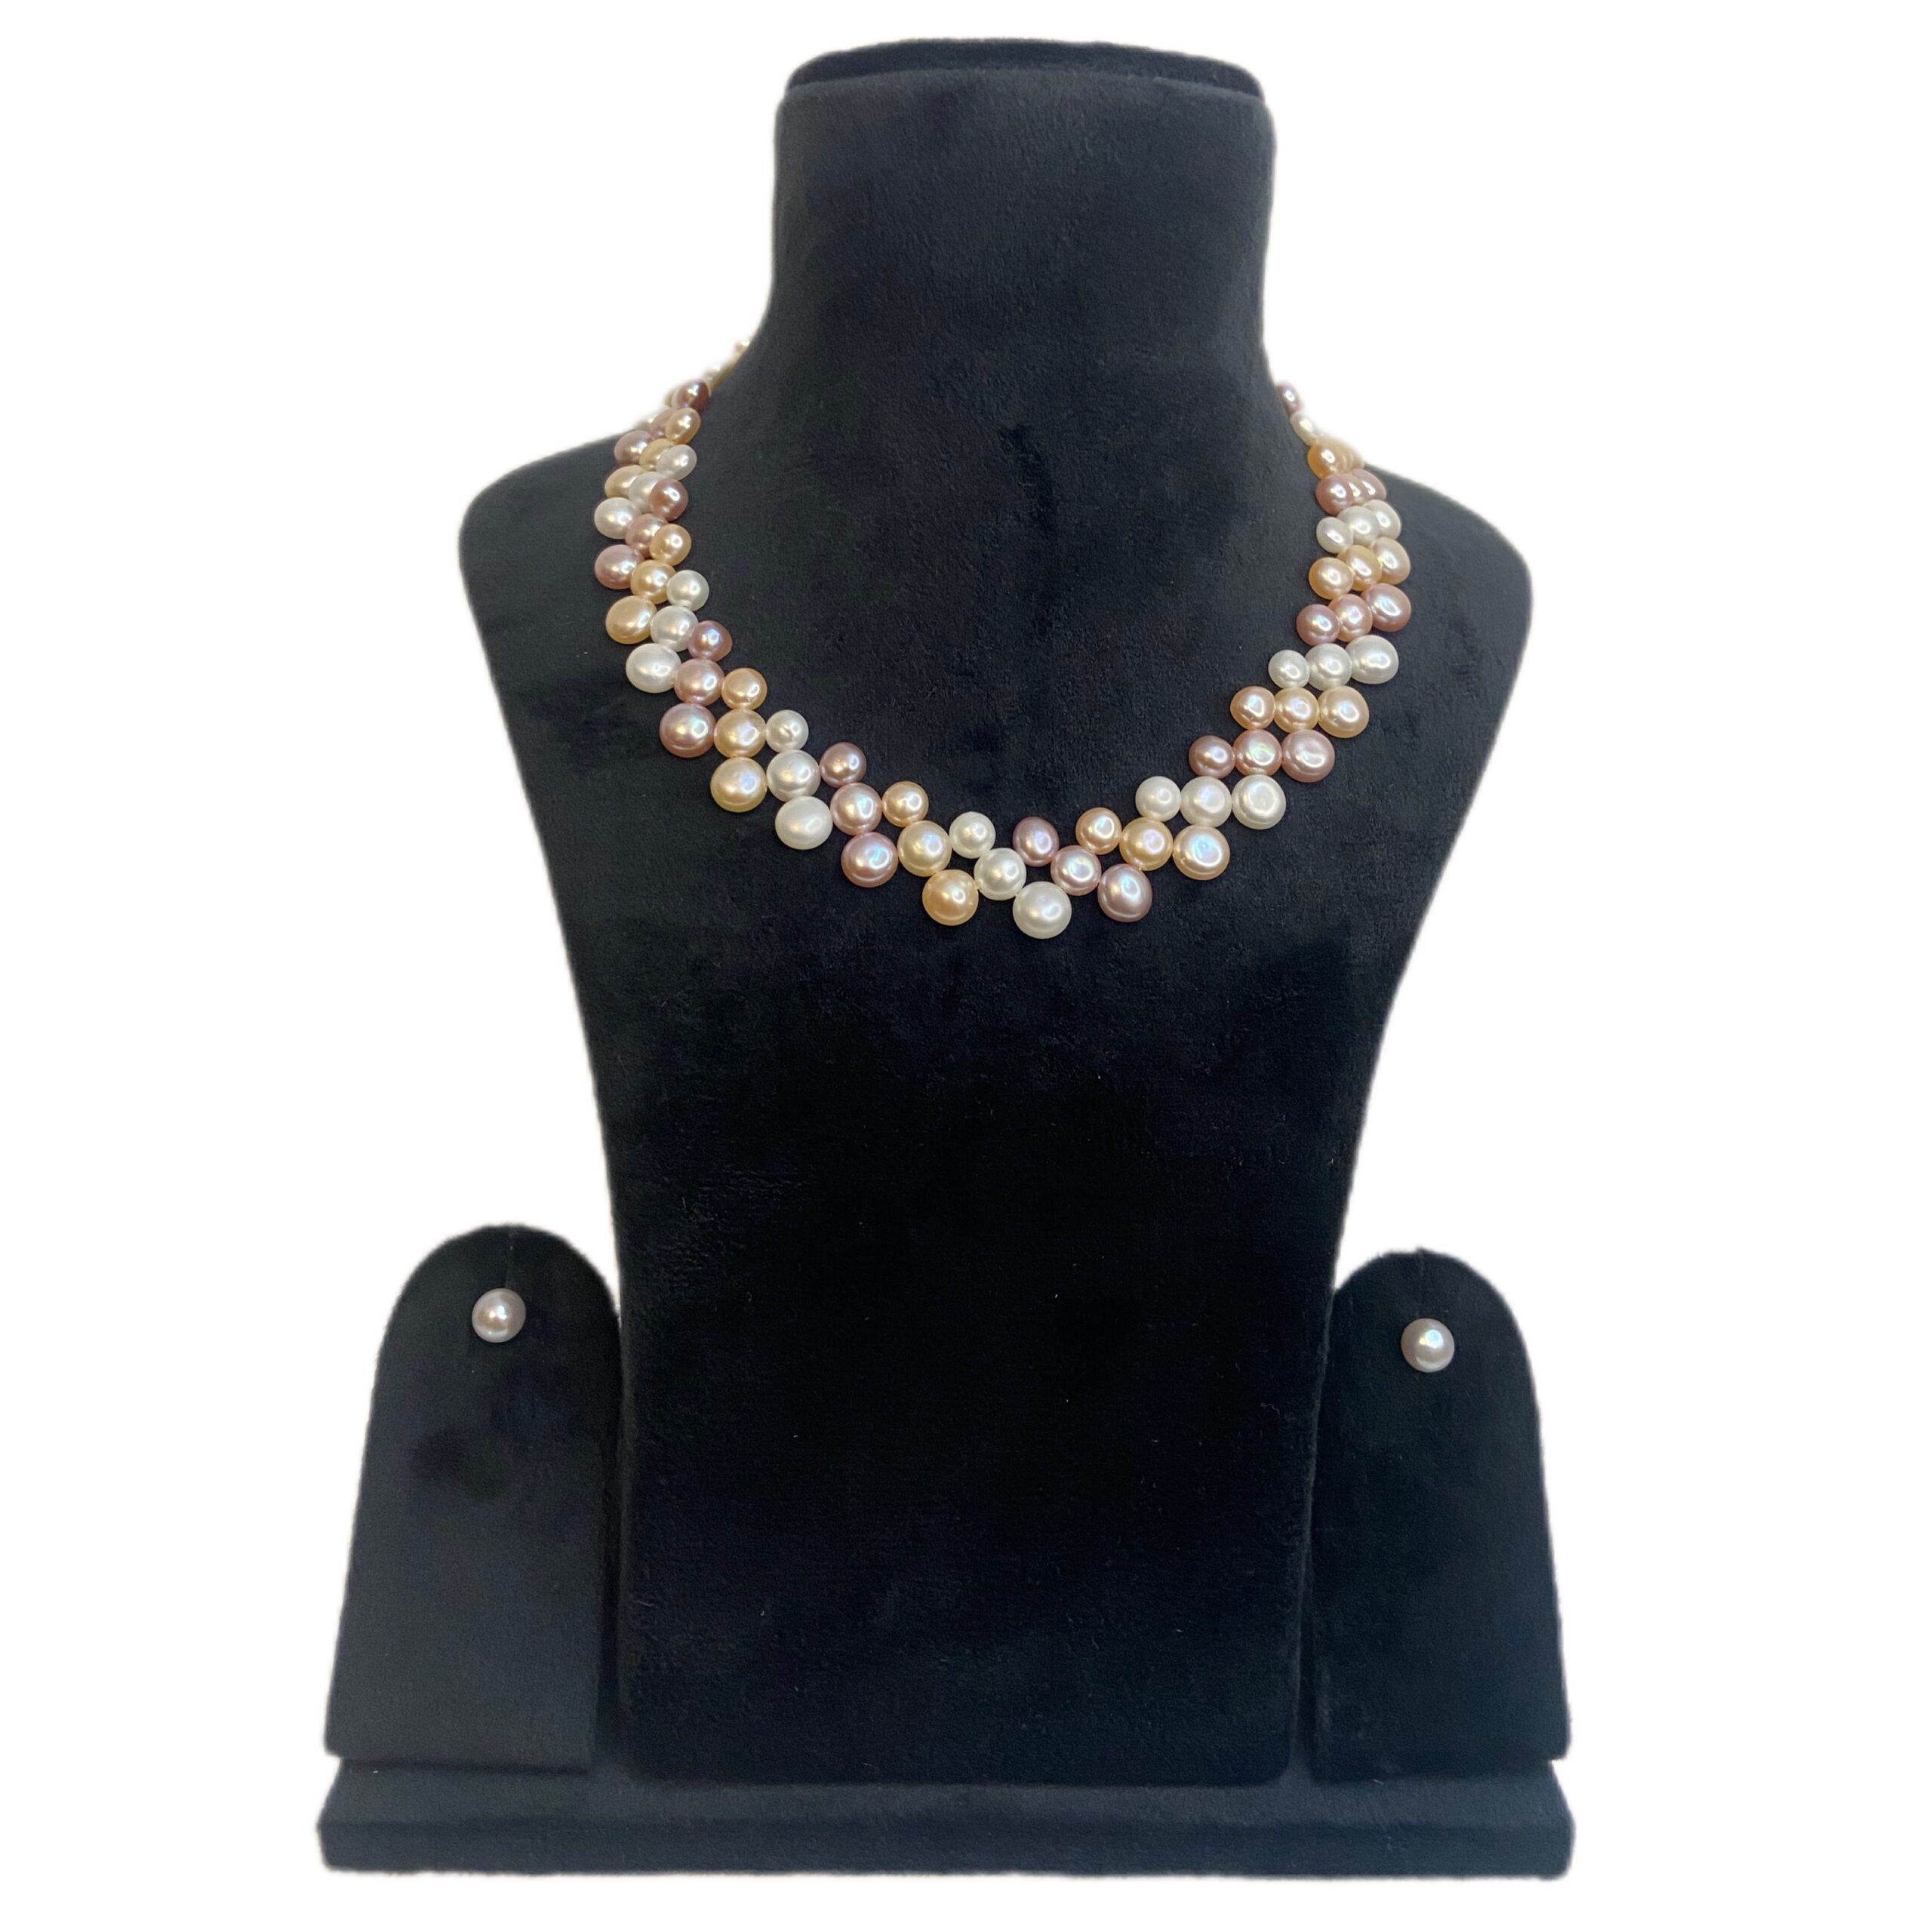 Zig zag button pearl necklace set in white, pink and lavender colours 16Inch